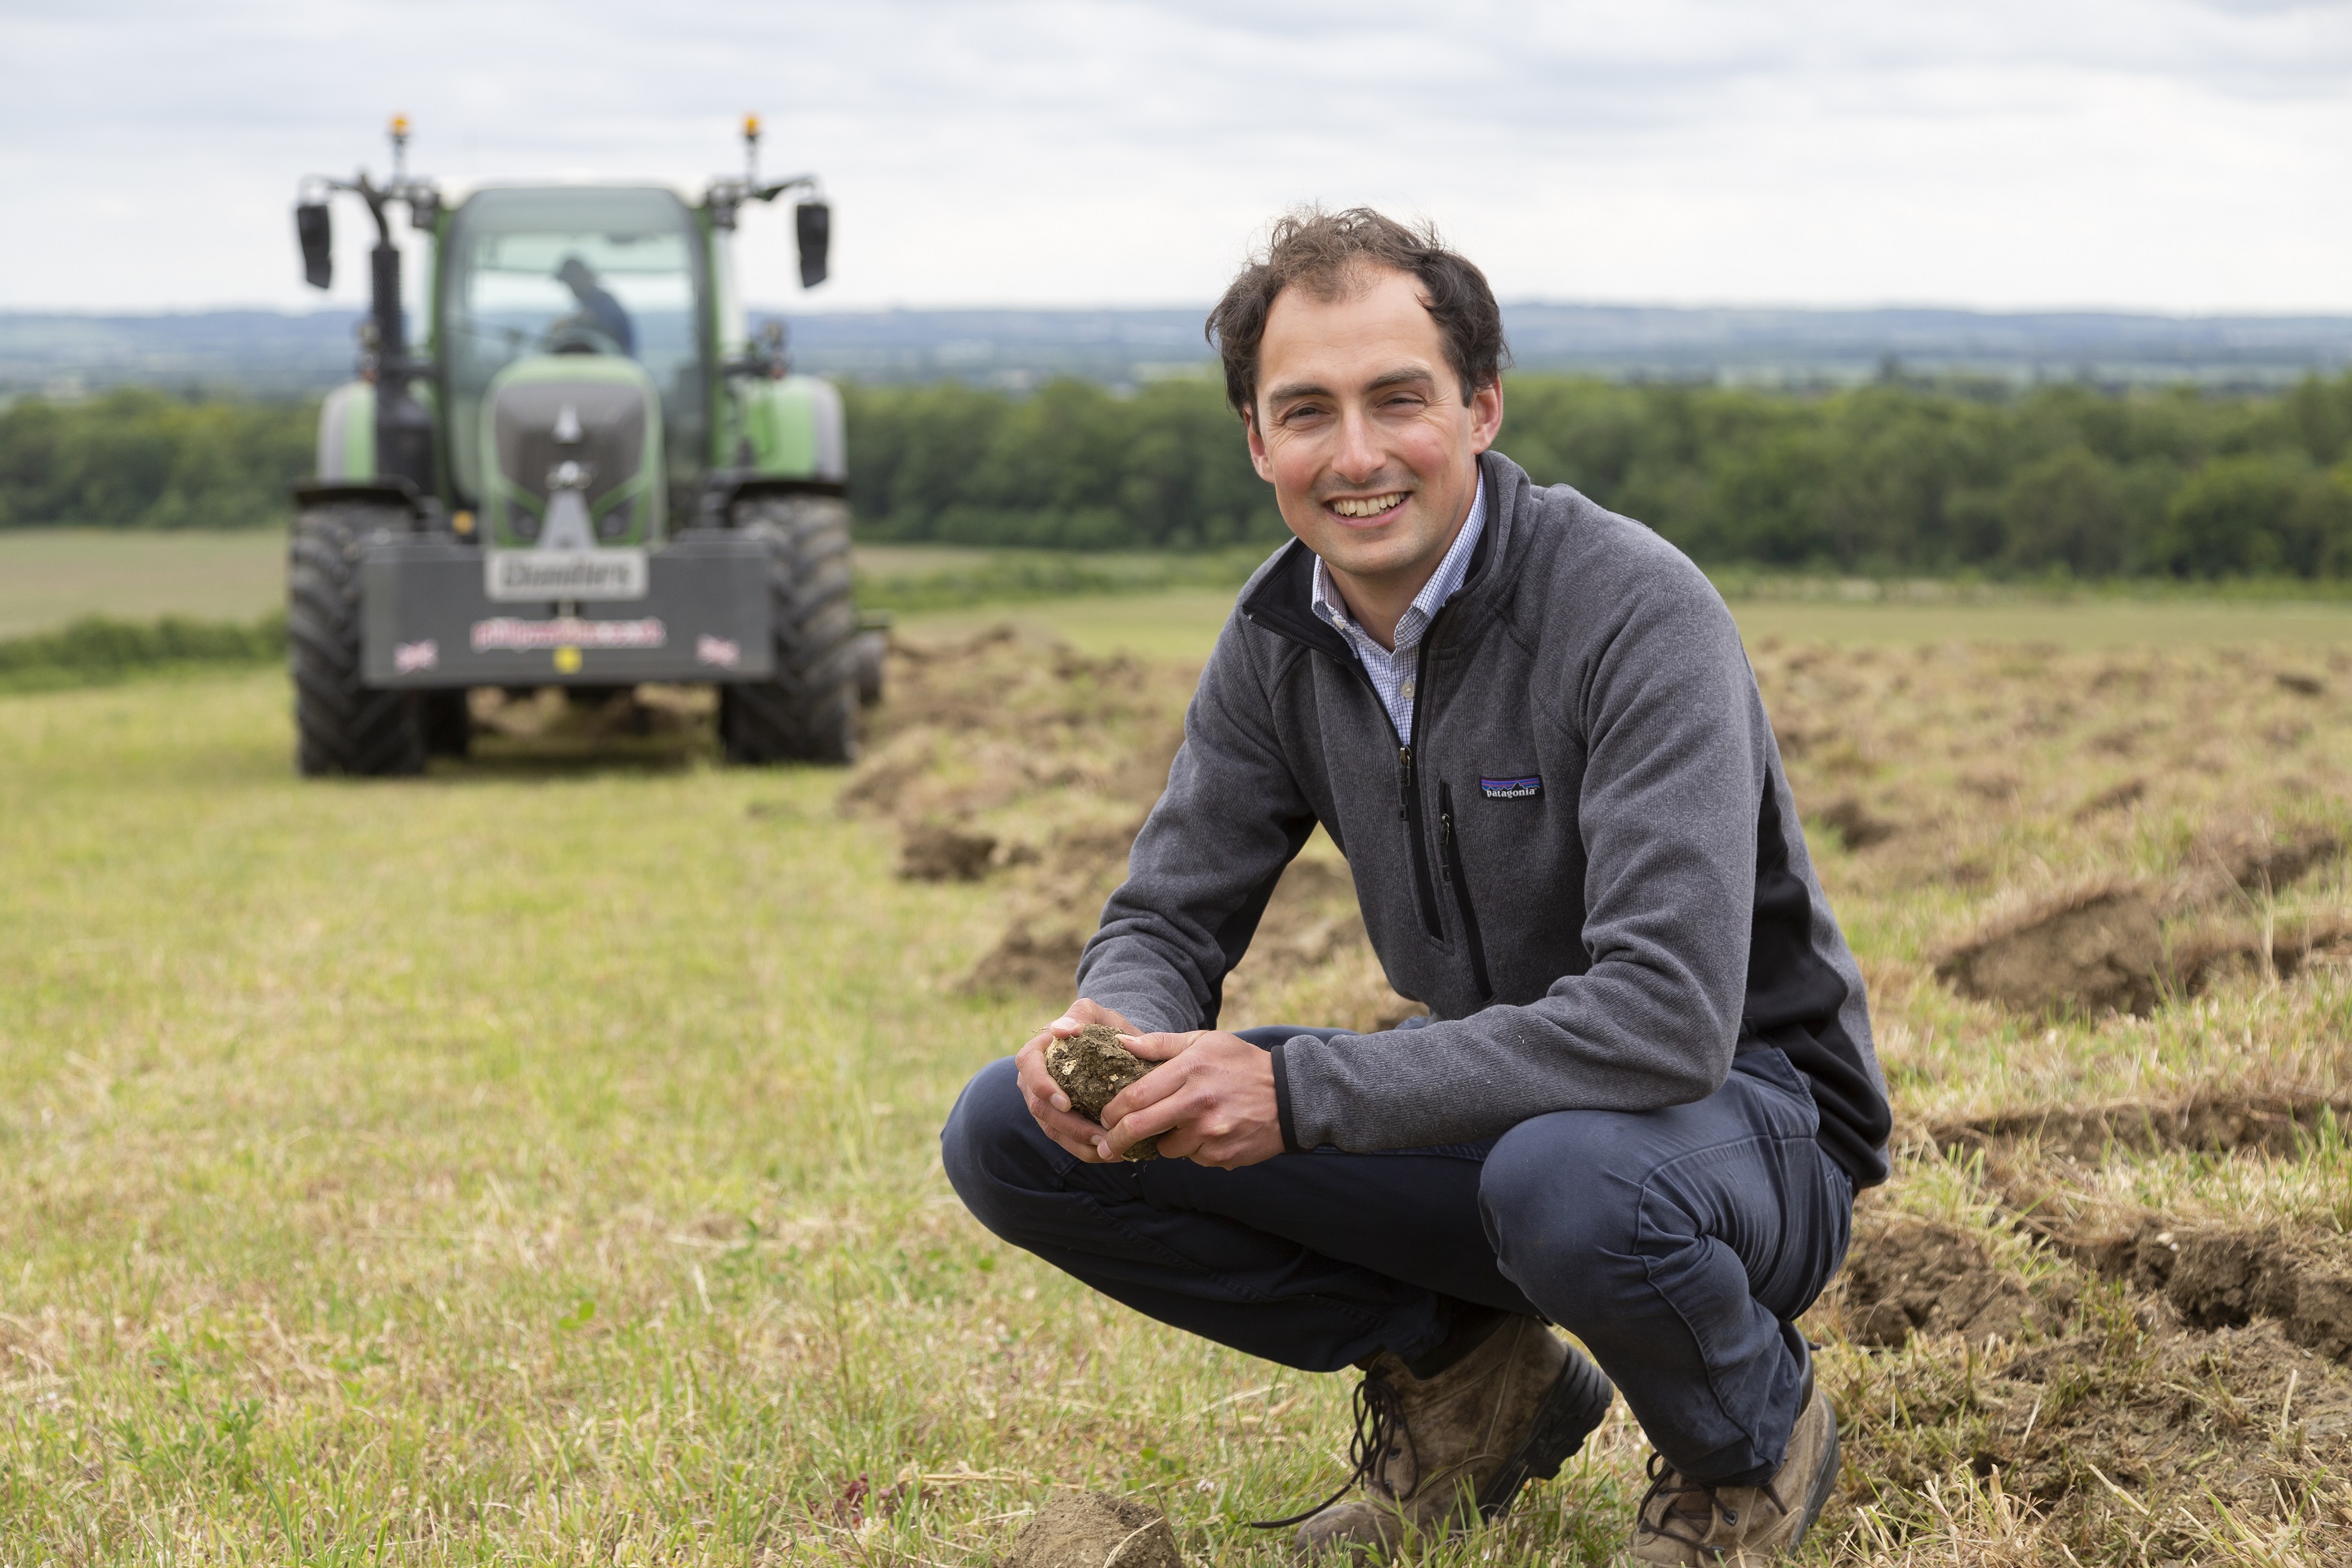 Callum Weir is the Farm Manager at Wimpole Estate Farm